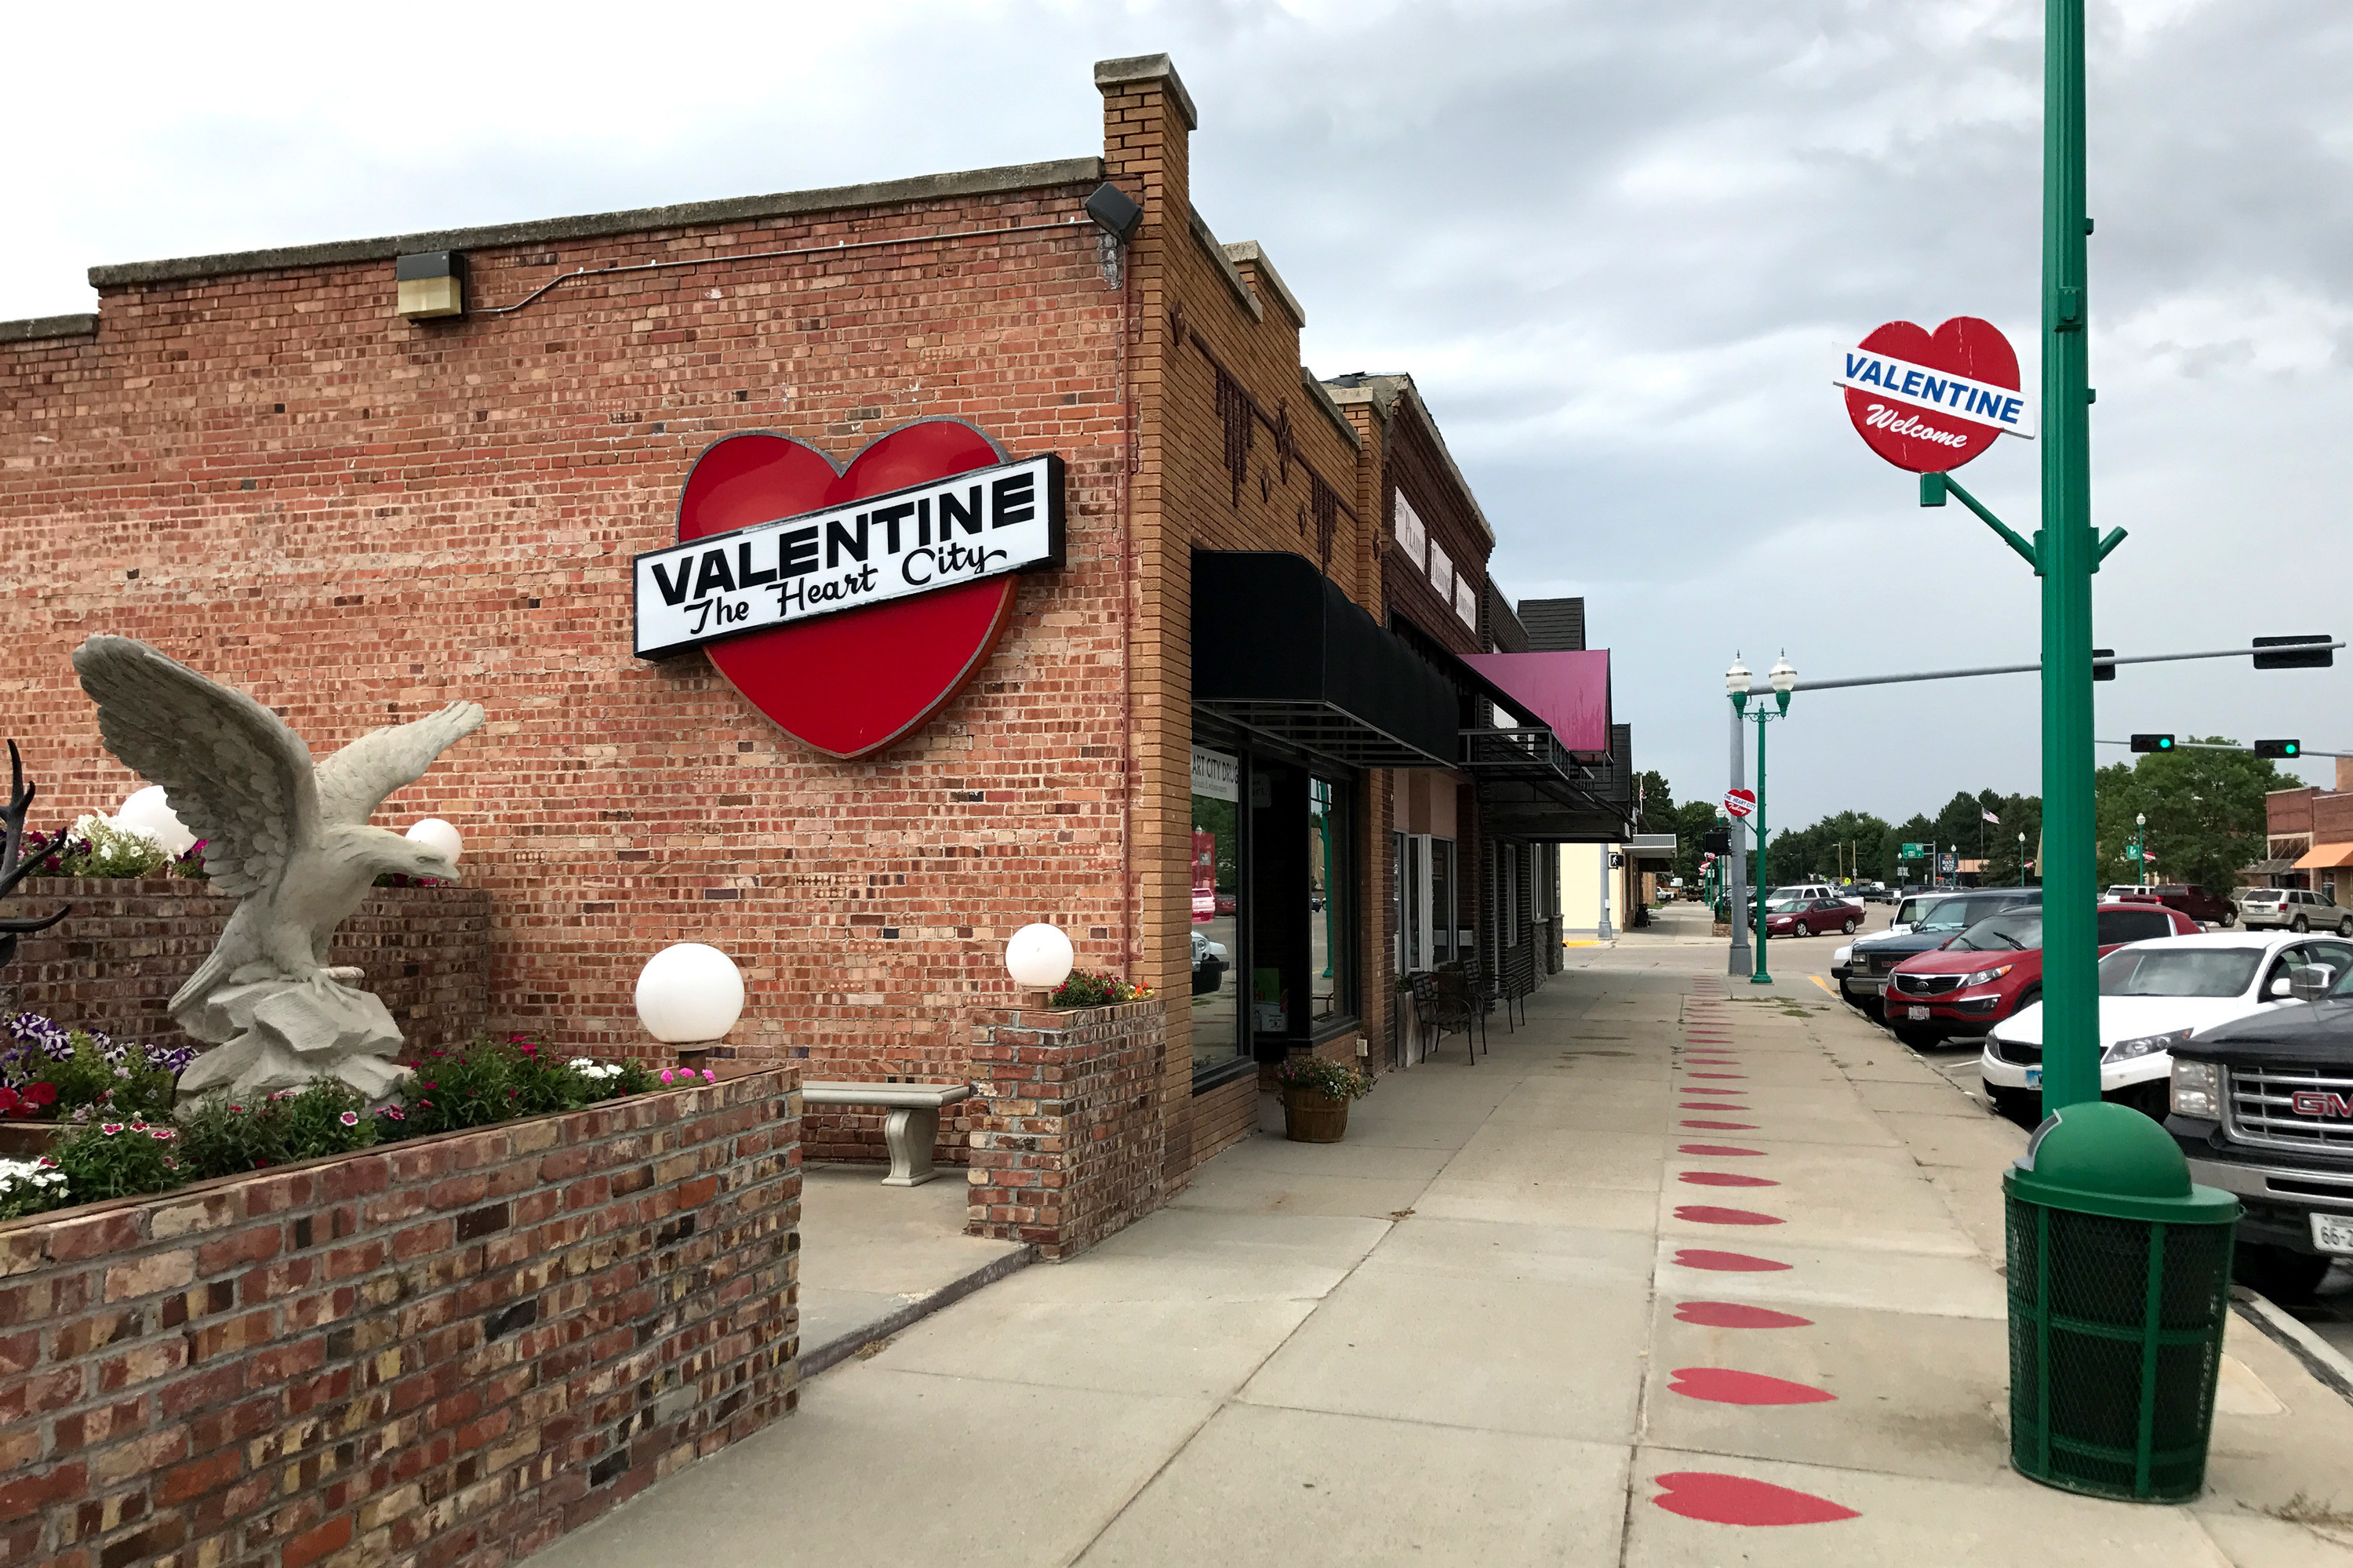 More young people are transplanting to small towns, such as Valentine, Neb., population 2,700 and the largest town of its size for at least a two-hour drive in any direction.